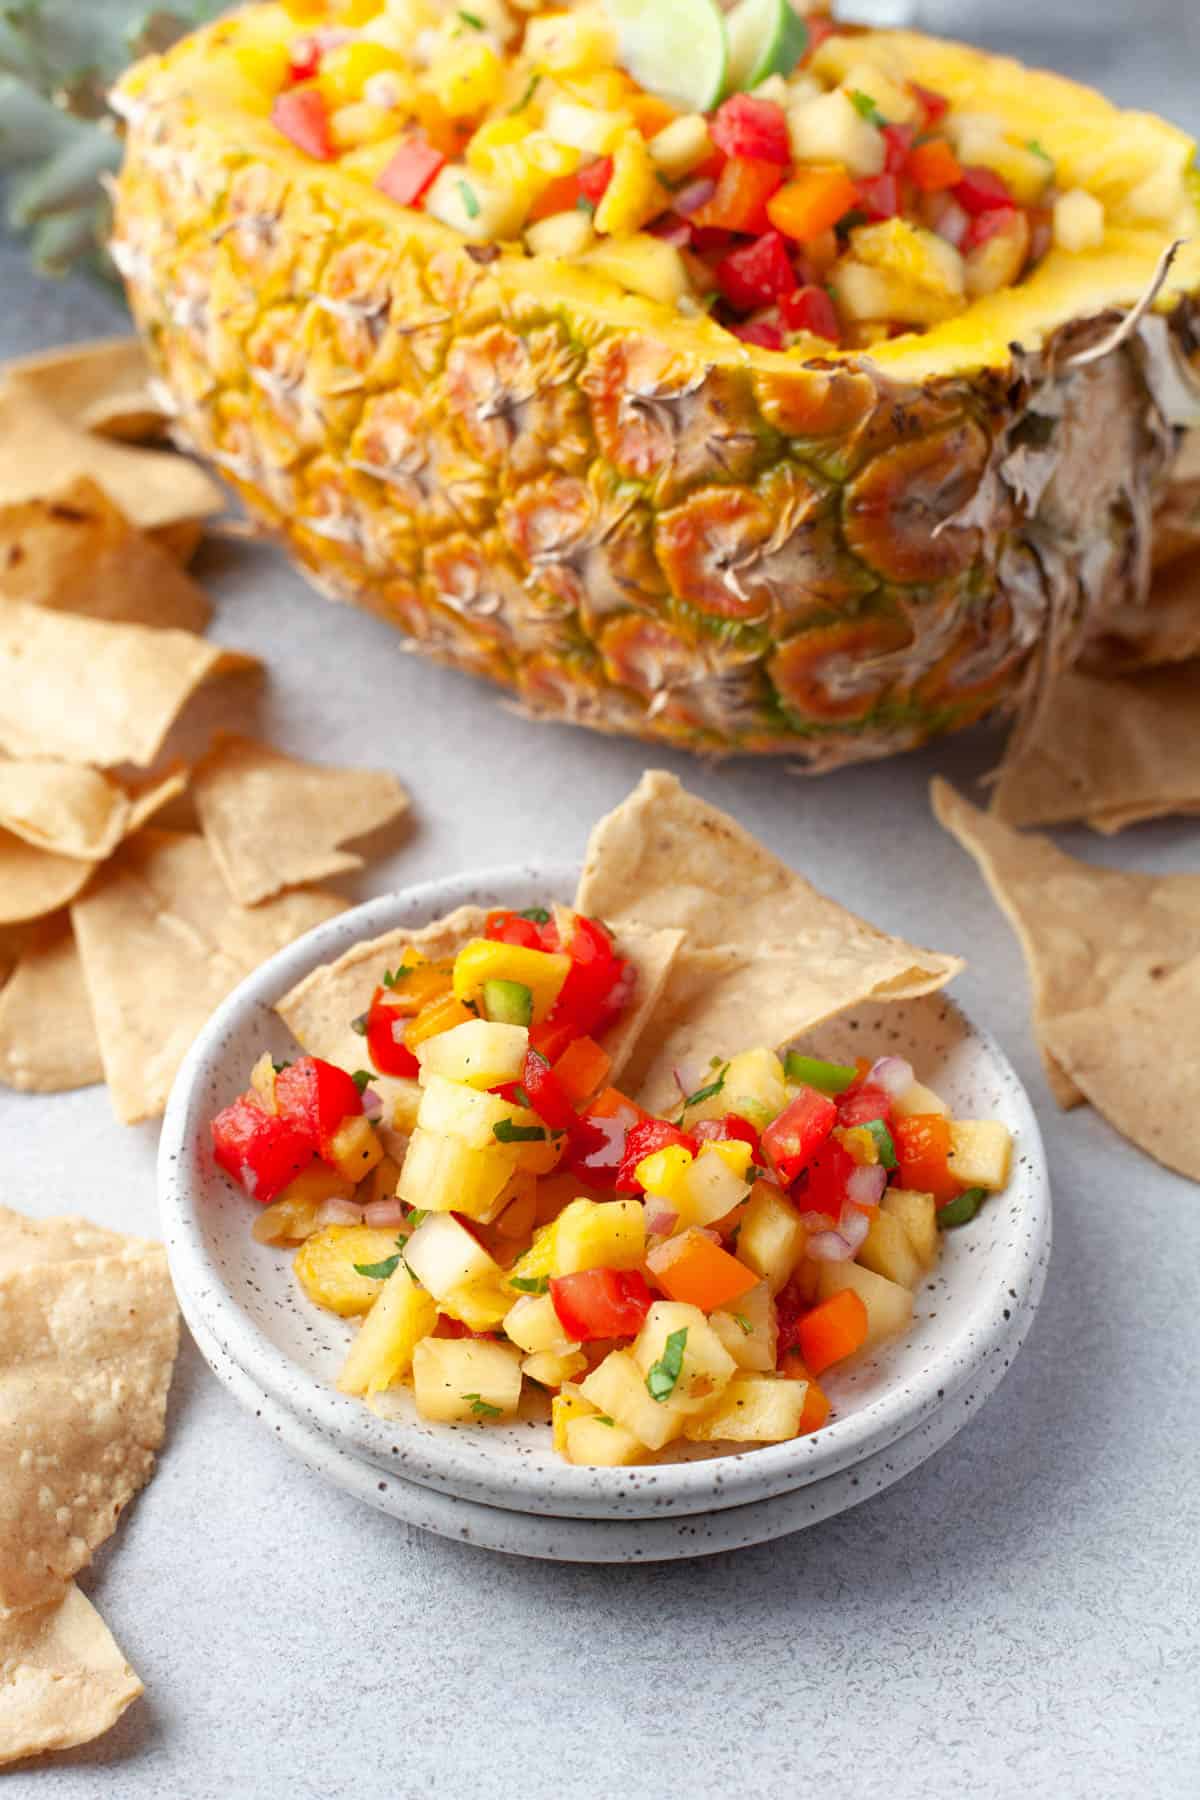 Pineapple salsa on a small plate in front of a half pineapple filled with pineapple salsa.